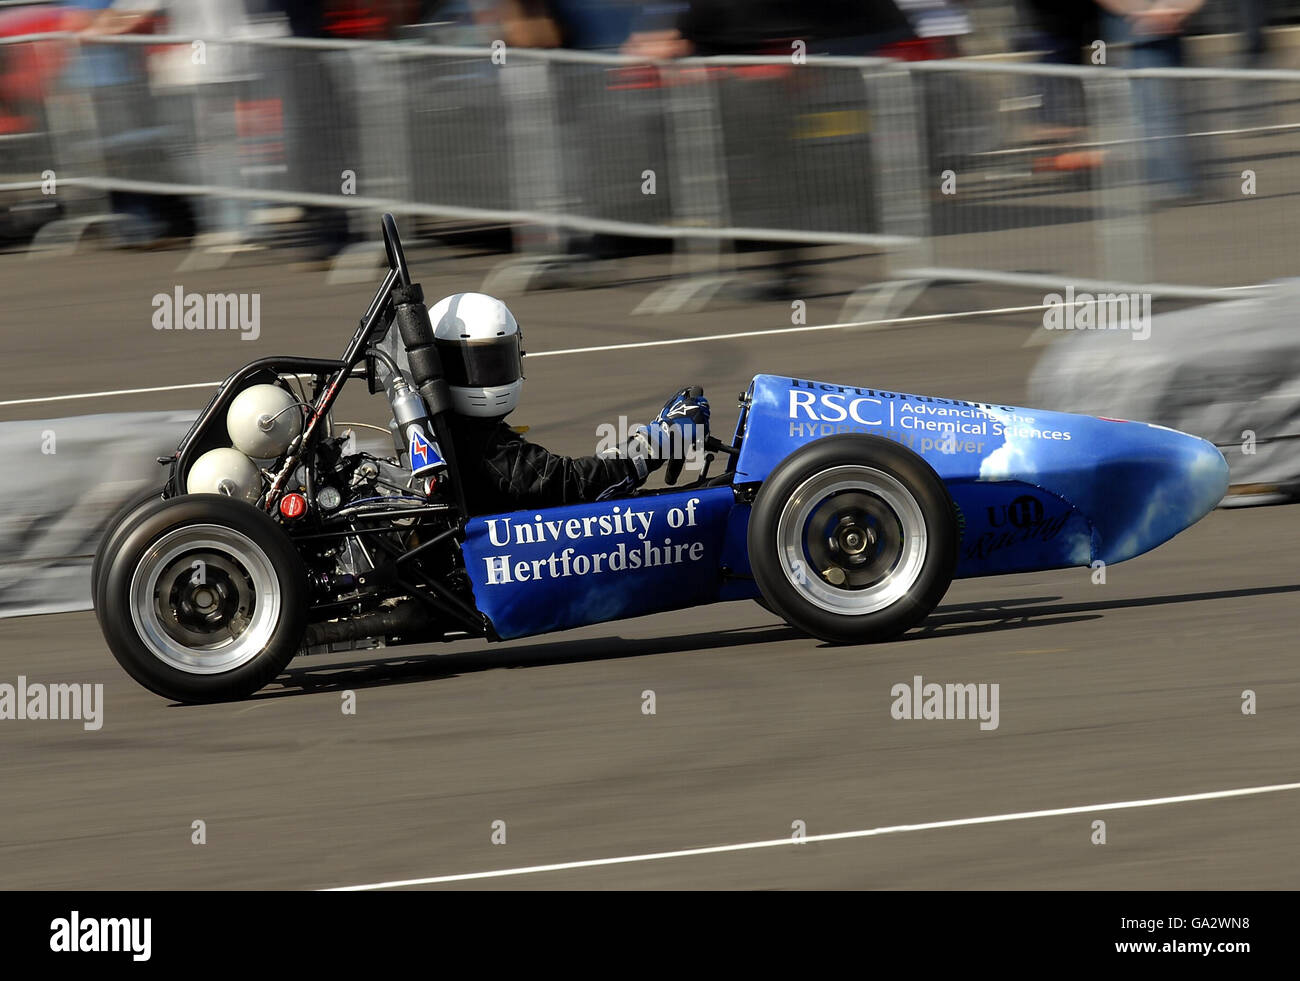 The University of Hertfordshire hydrogen powered race car at Silverstone circuit in Northamptonshire. Stock Photo